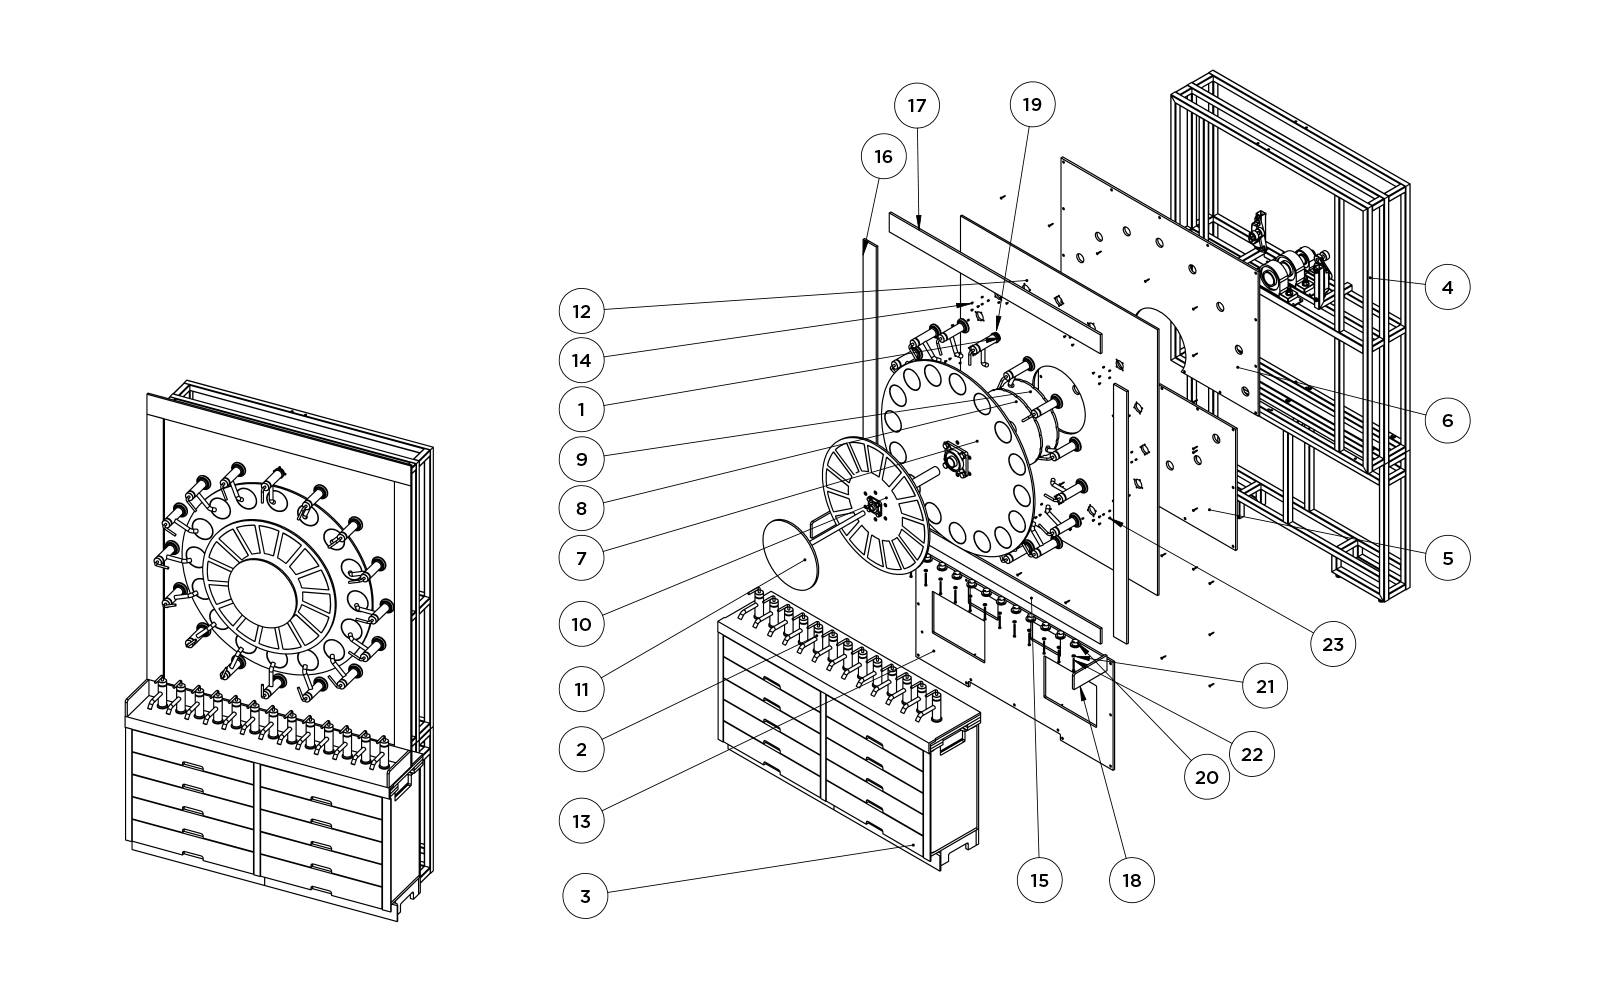 A diagram of the Kohler display that The Bernard Group engineered with an innovative mechanism that perfectly aligns each unique finish by easily clicking into place while also securely supporting the weight of the full system.